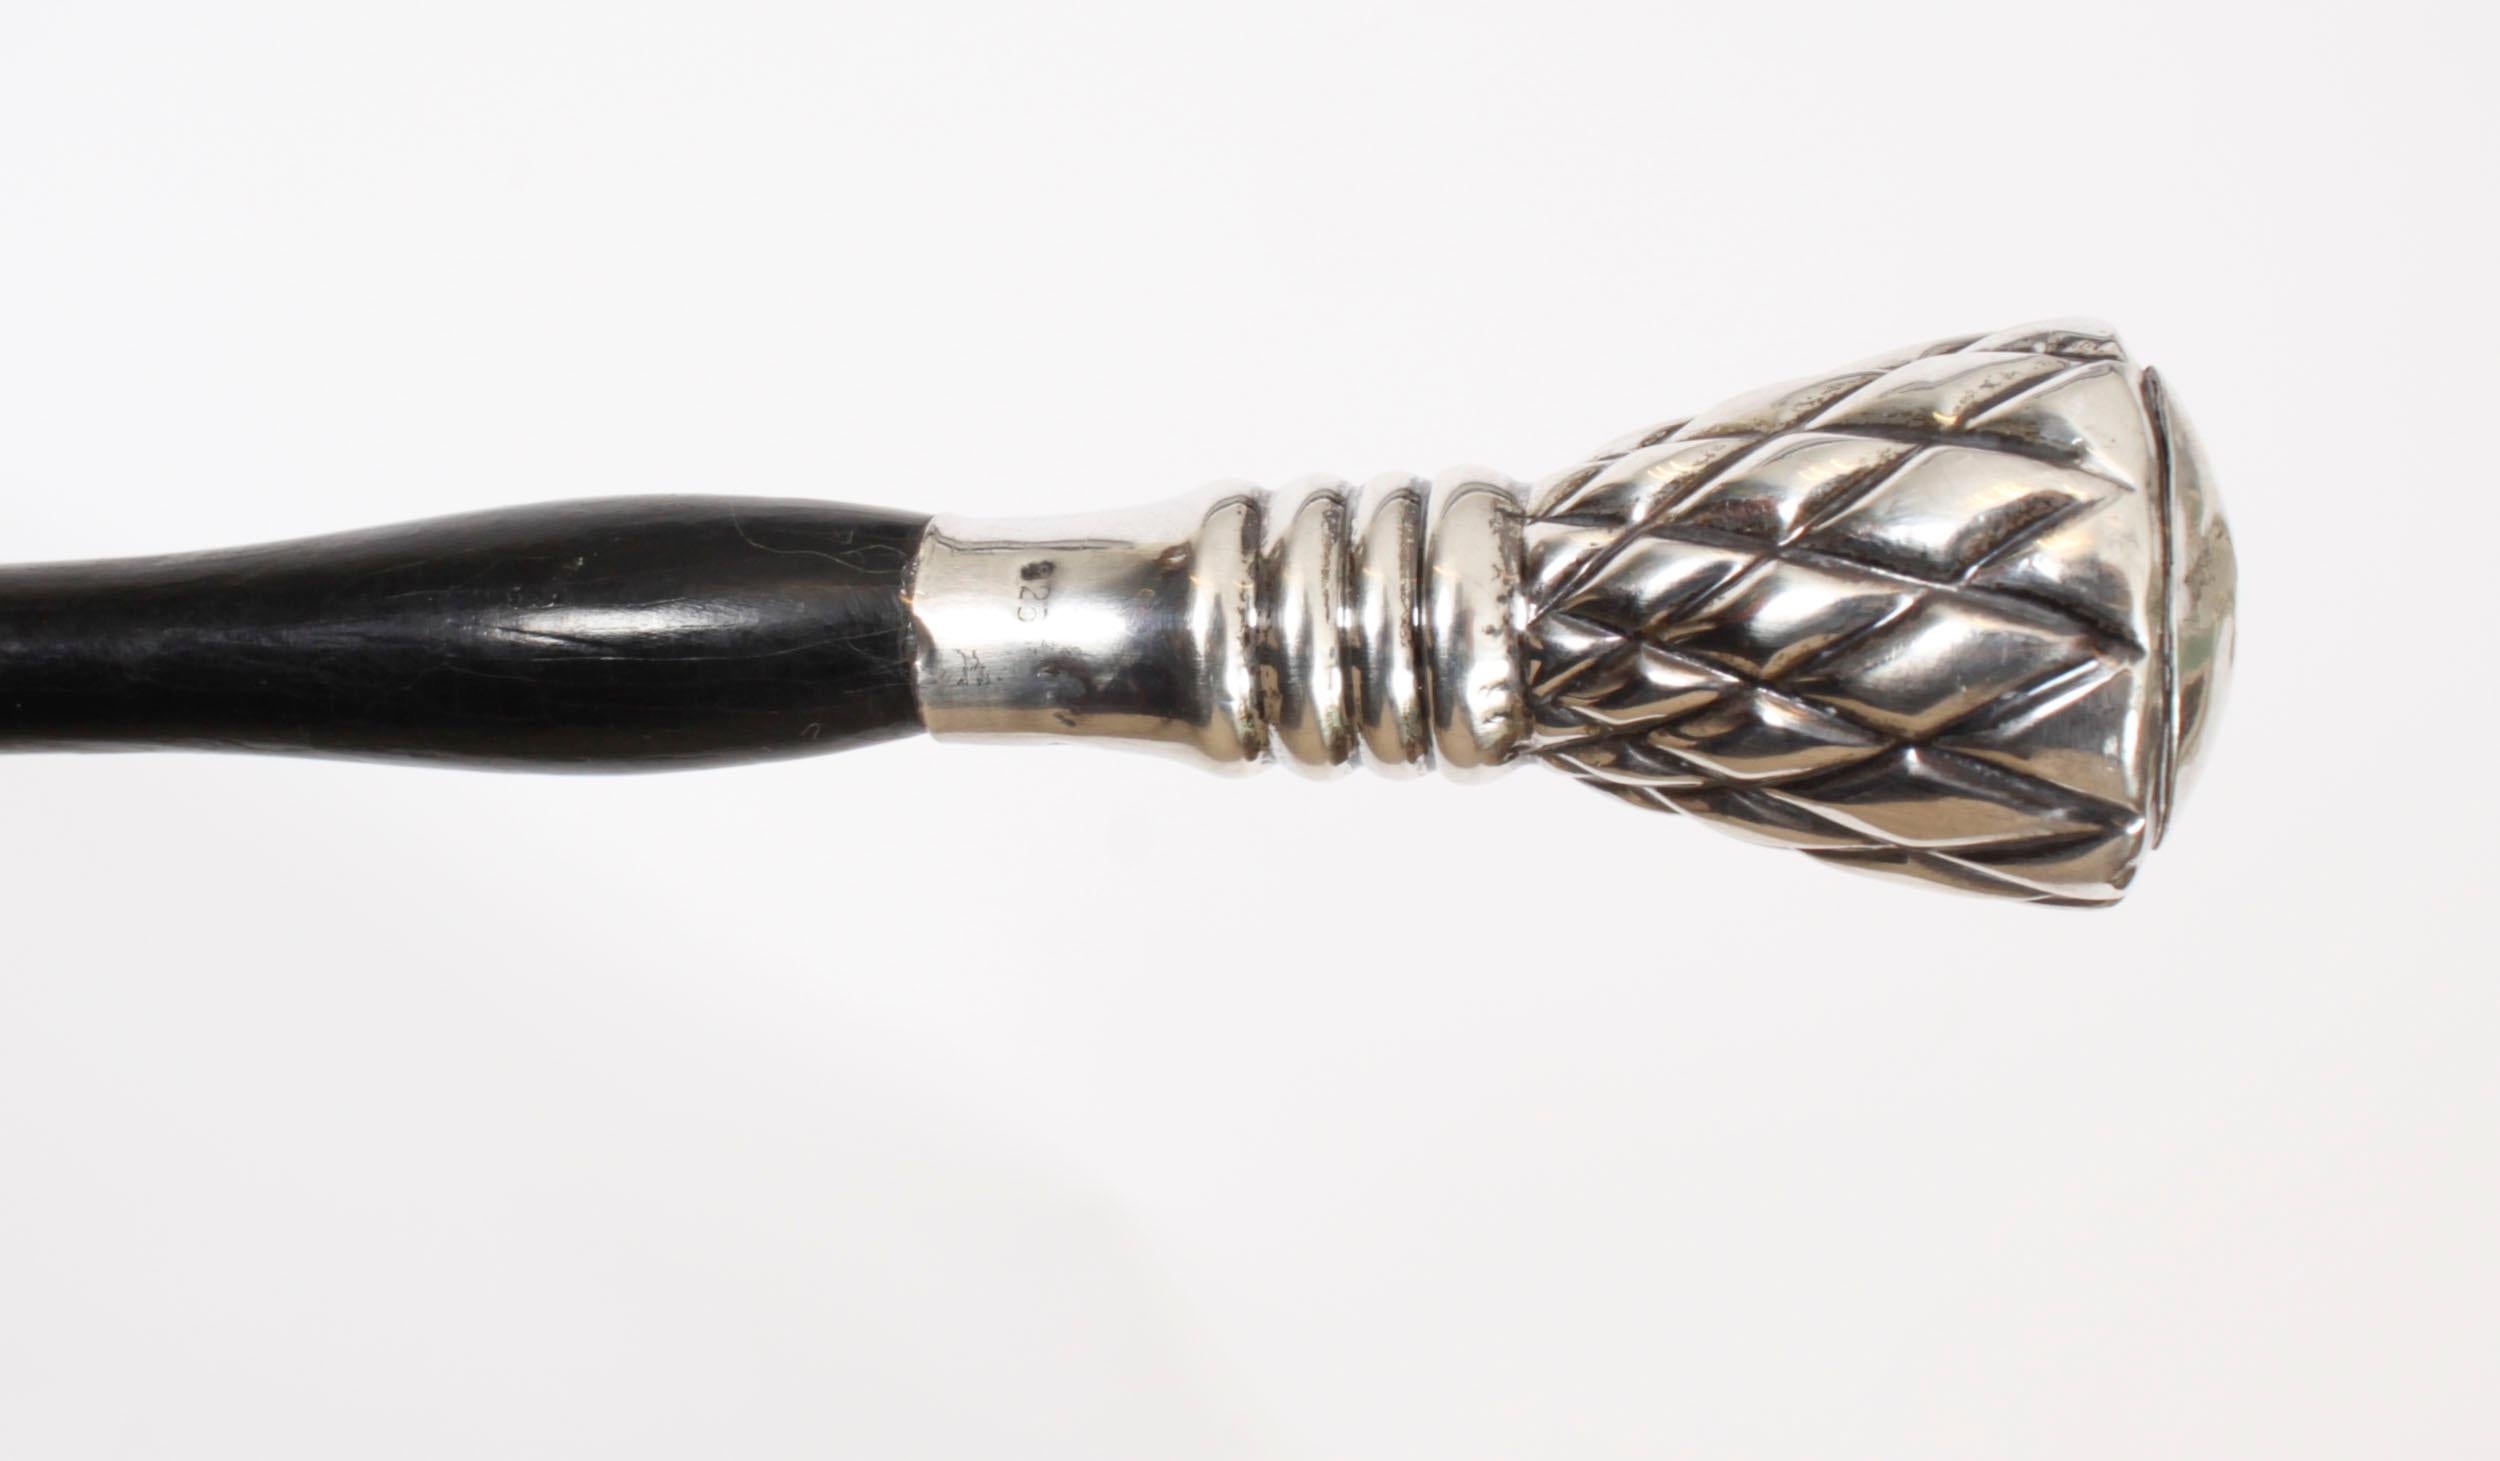 This is a beautiful antique sterling silver pommel walking stick circa 1880 in date

The striking stick features an ornate silver chequered pommel on a gentle tapering ebonized shaft with a silver sleeve and it has its original brass ferrule.

Add